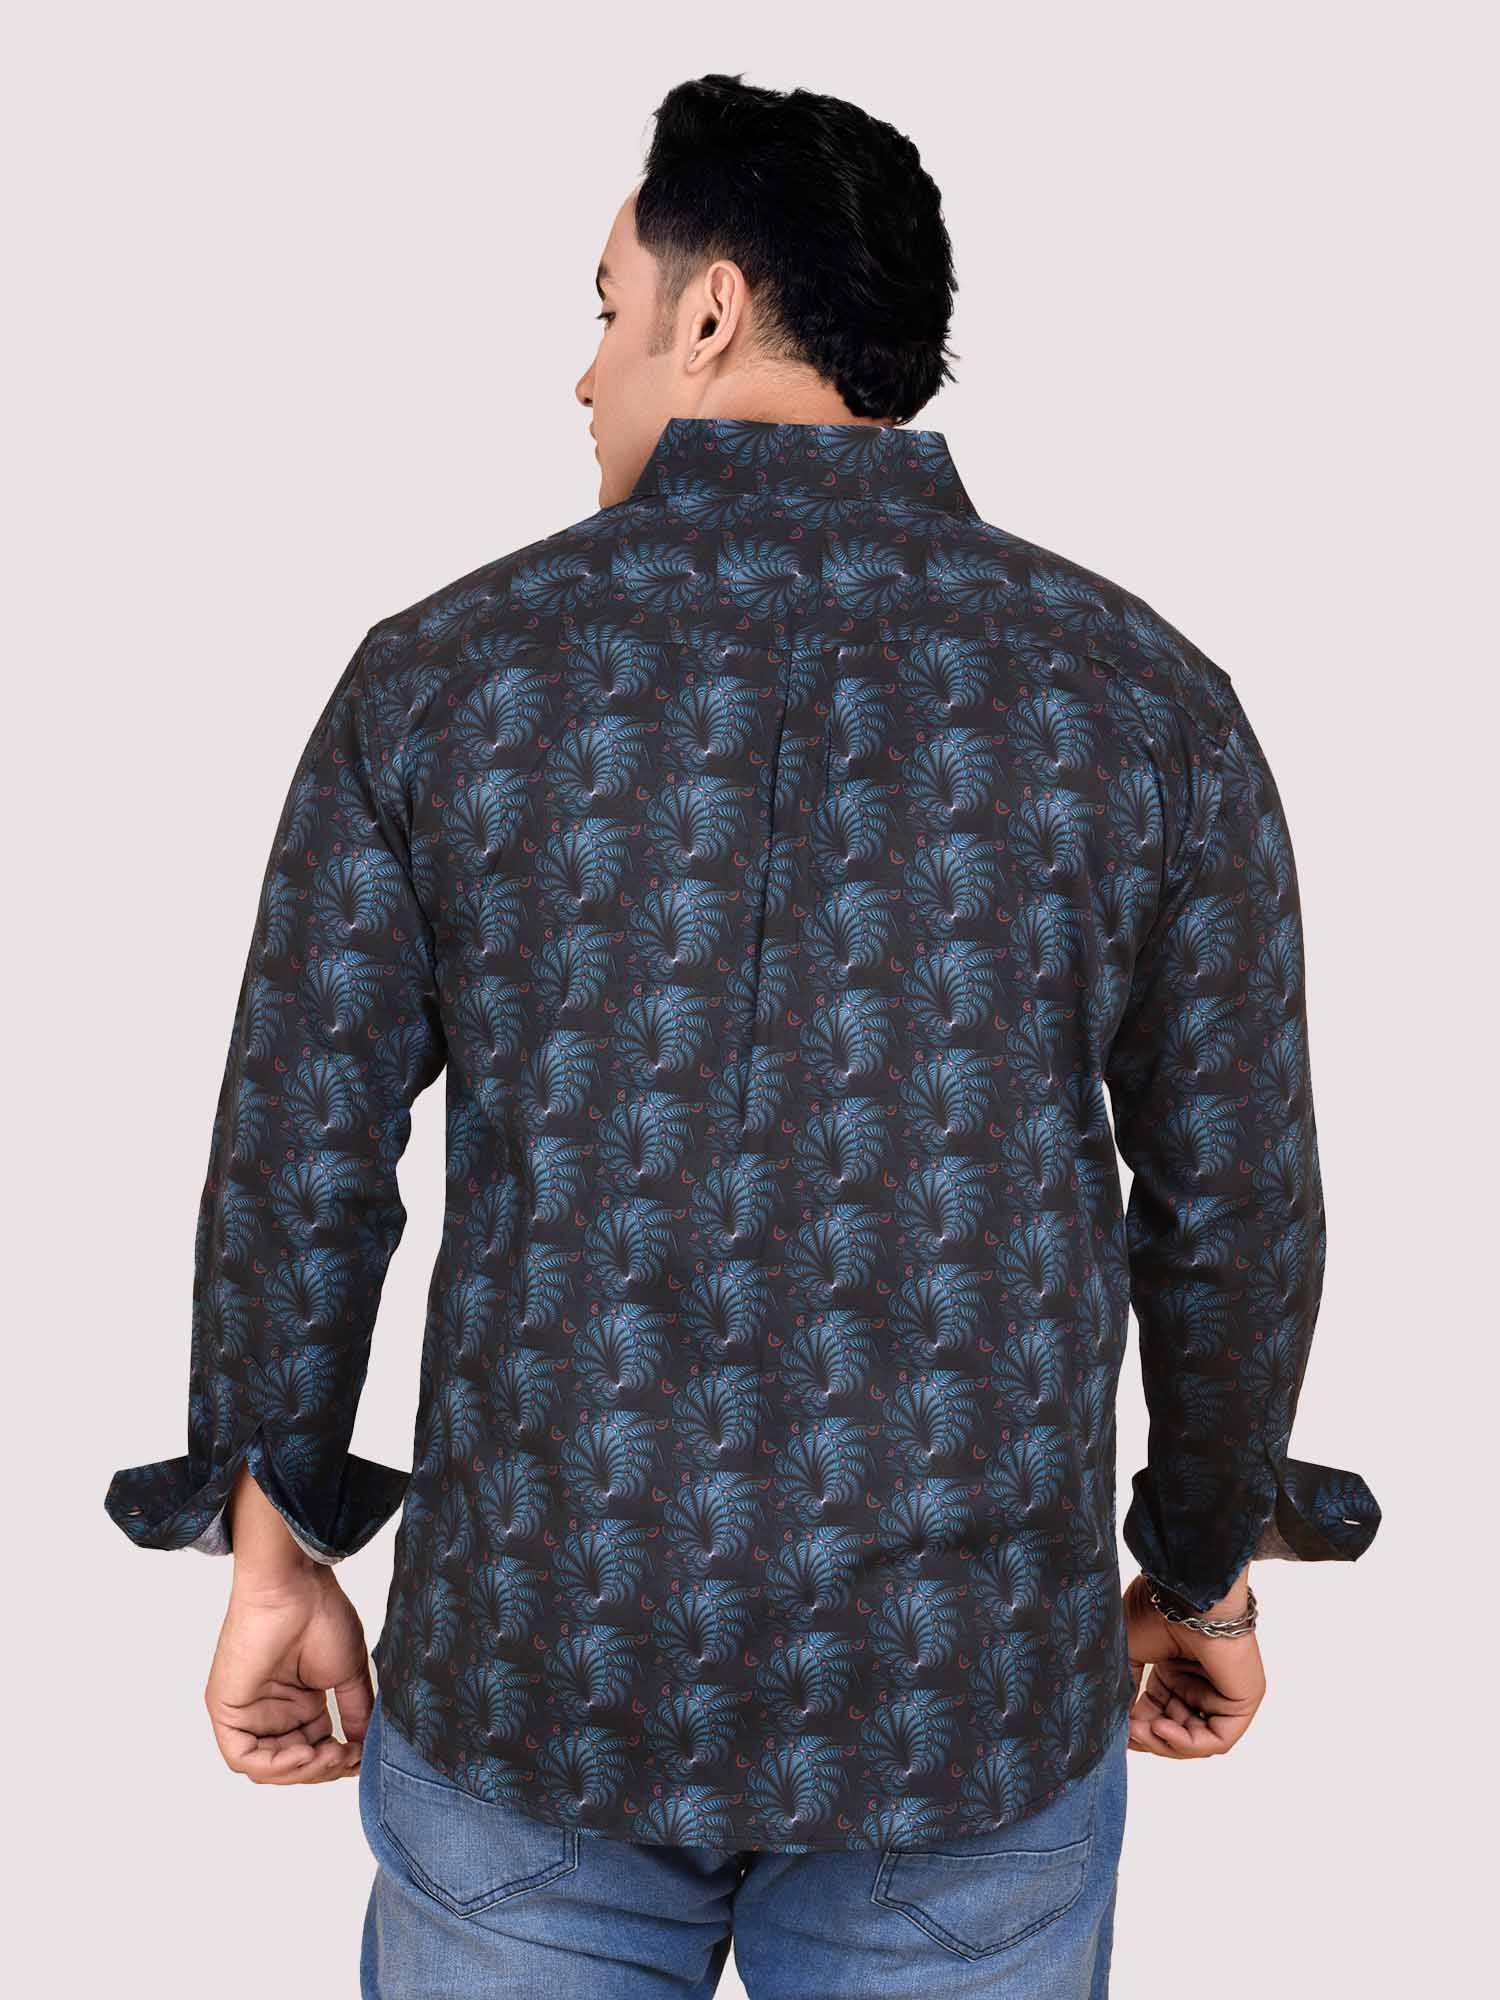 Black and Blue Abstract Flower Printed Cotton Full Sleeve Men's Plus size